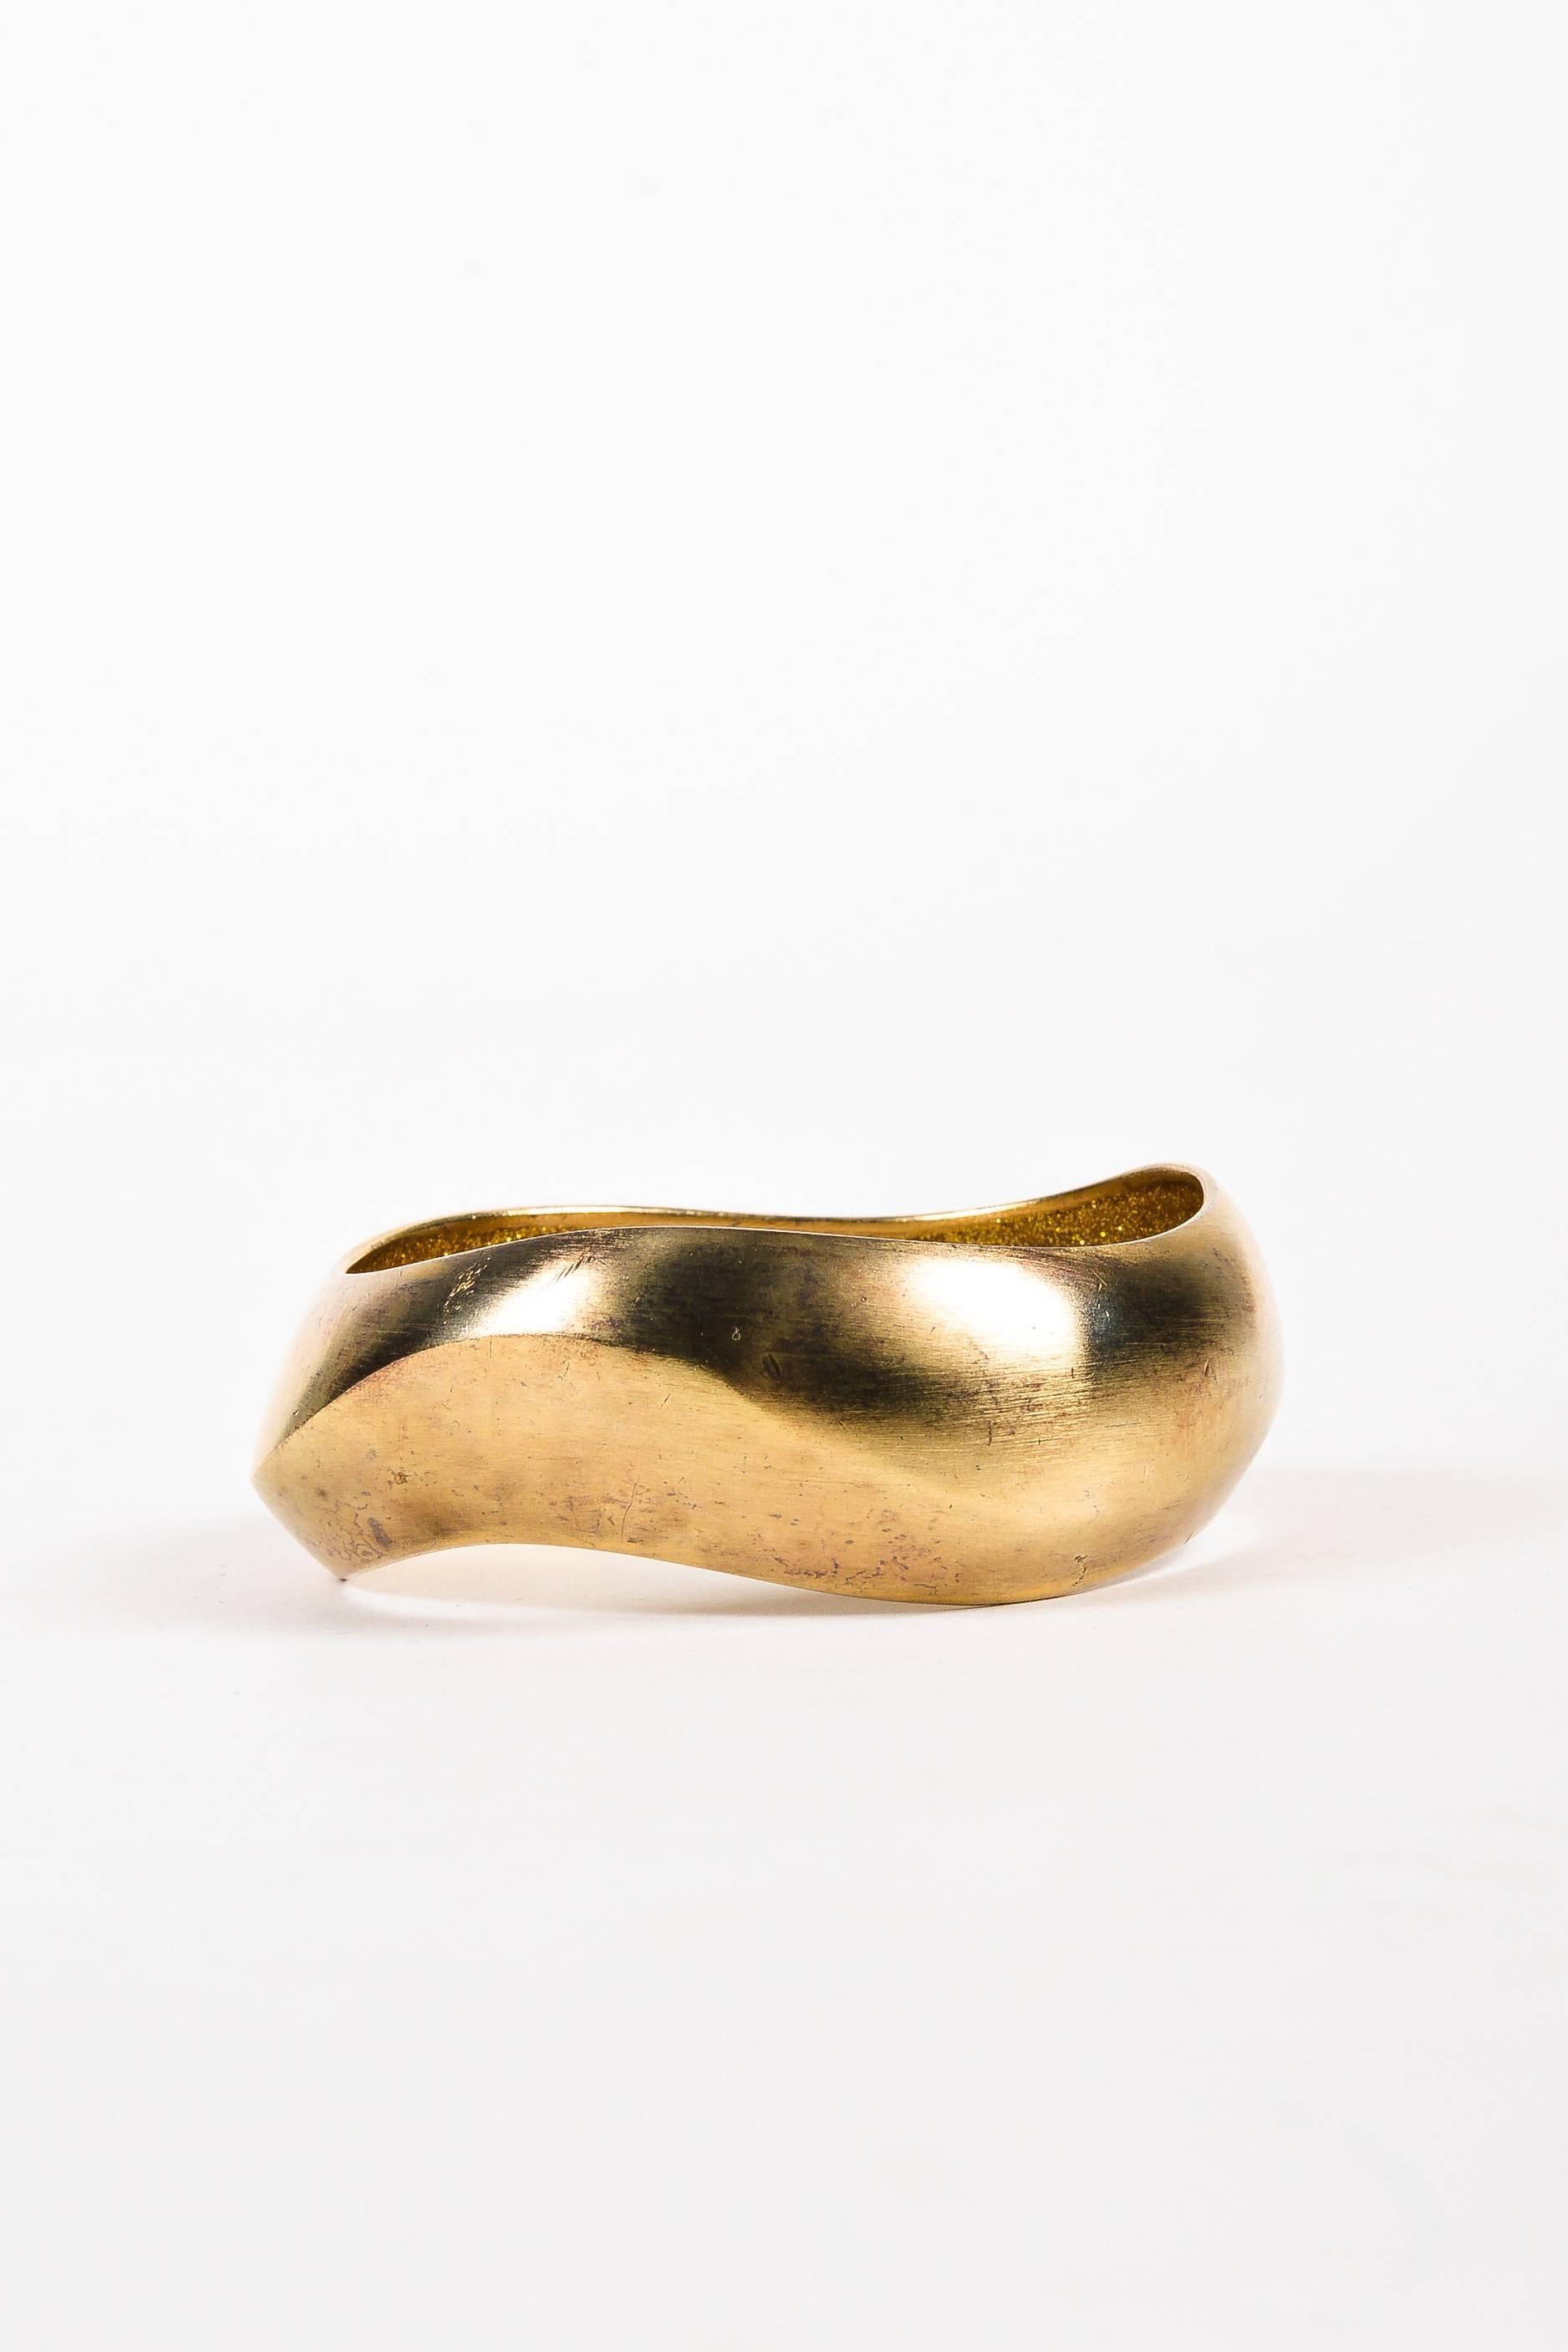 Chanel Spring 2007 Brushed Gold Tone Enameled Metal Wavy Distressed Bangle In Good Condition For Sale In Chicago, IL